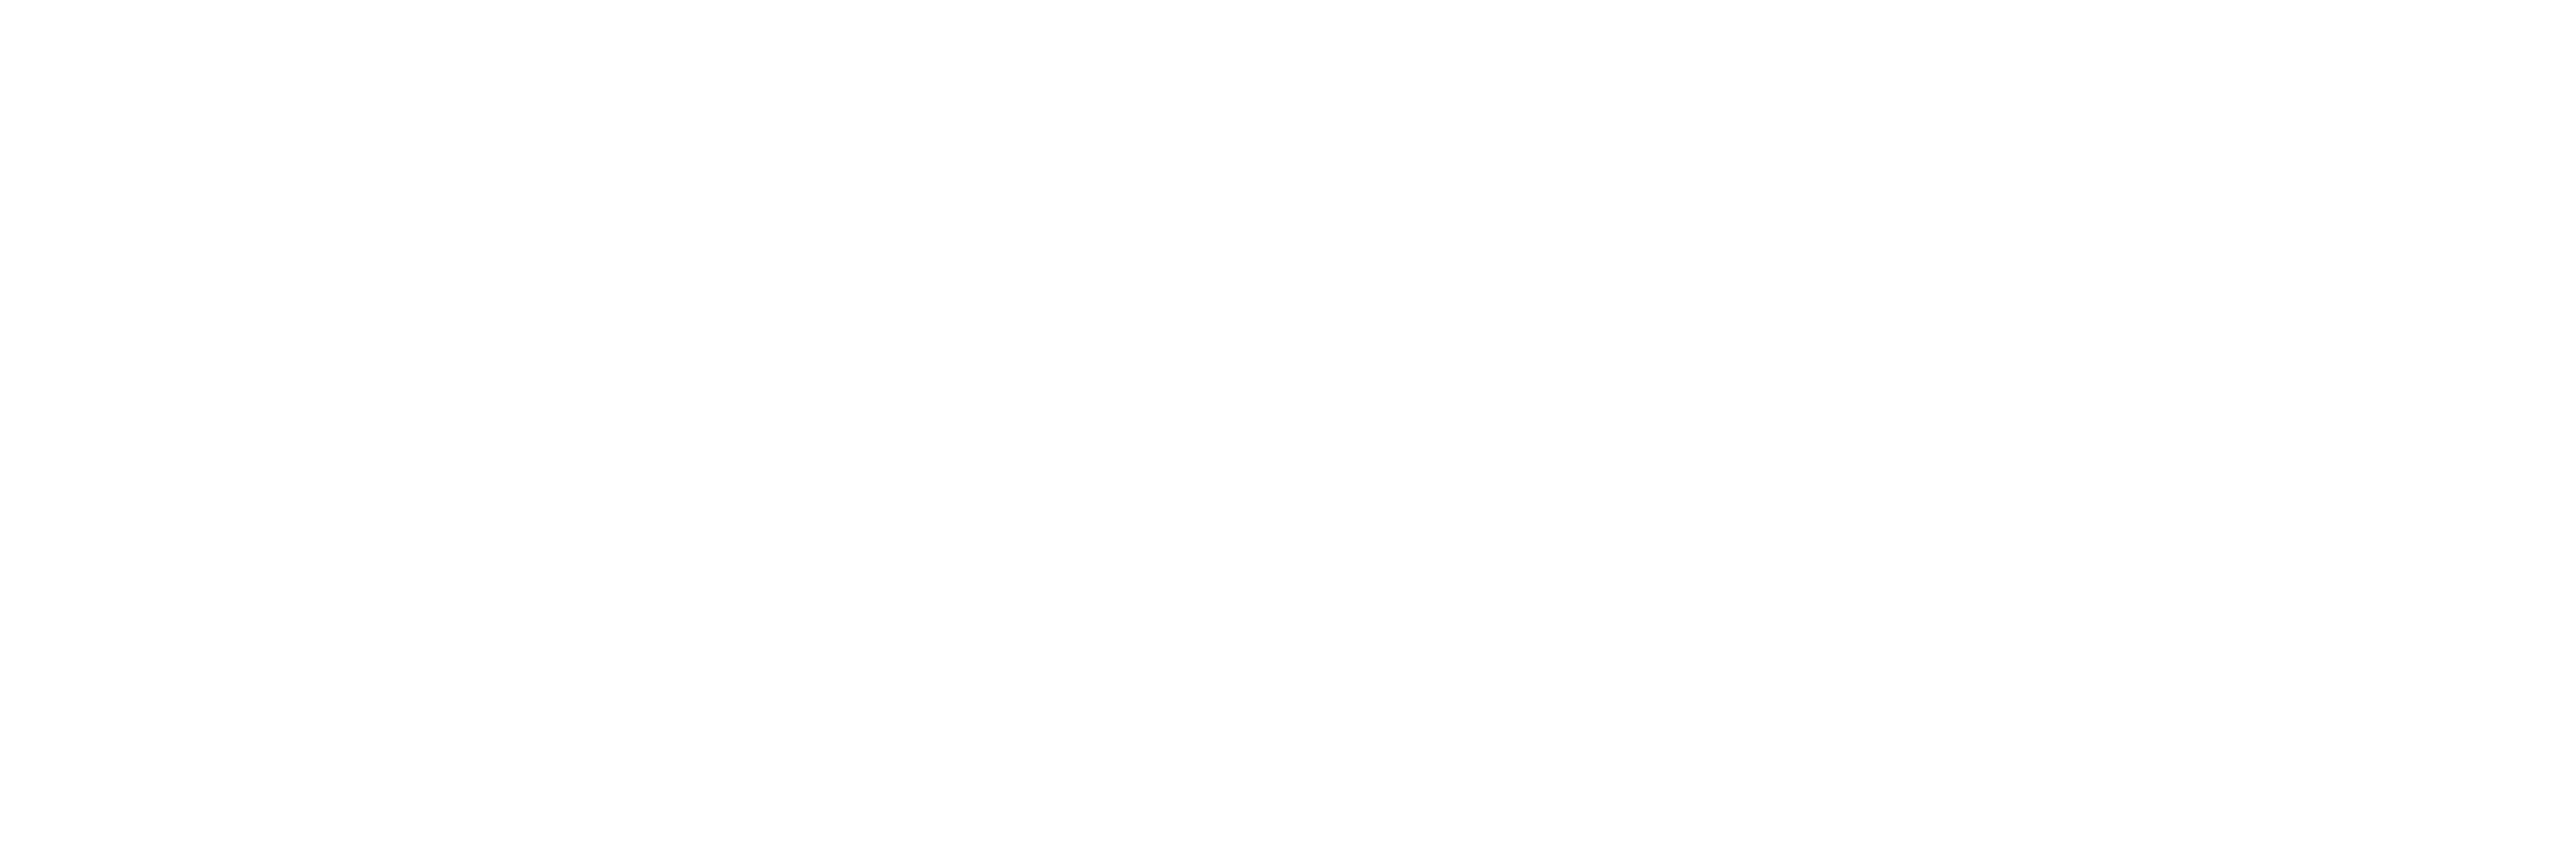 City of Portsmouth College logo.